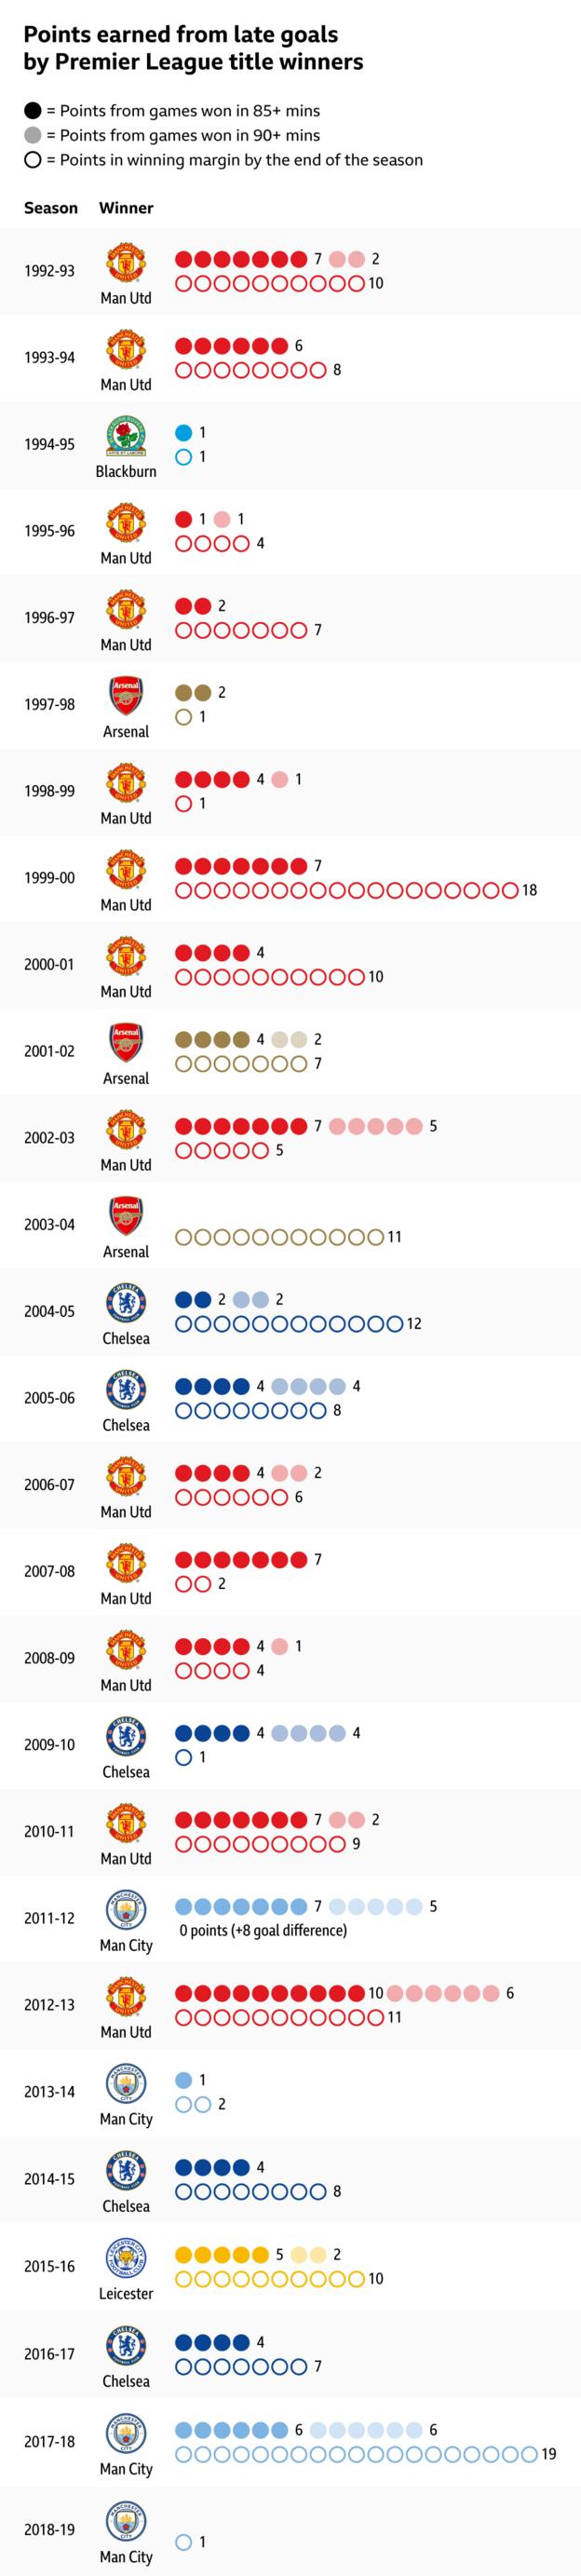 Points earned from late goals by Premier League title winners